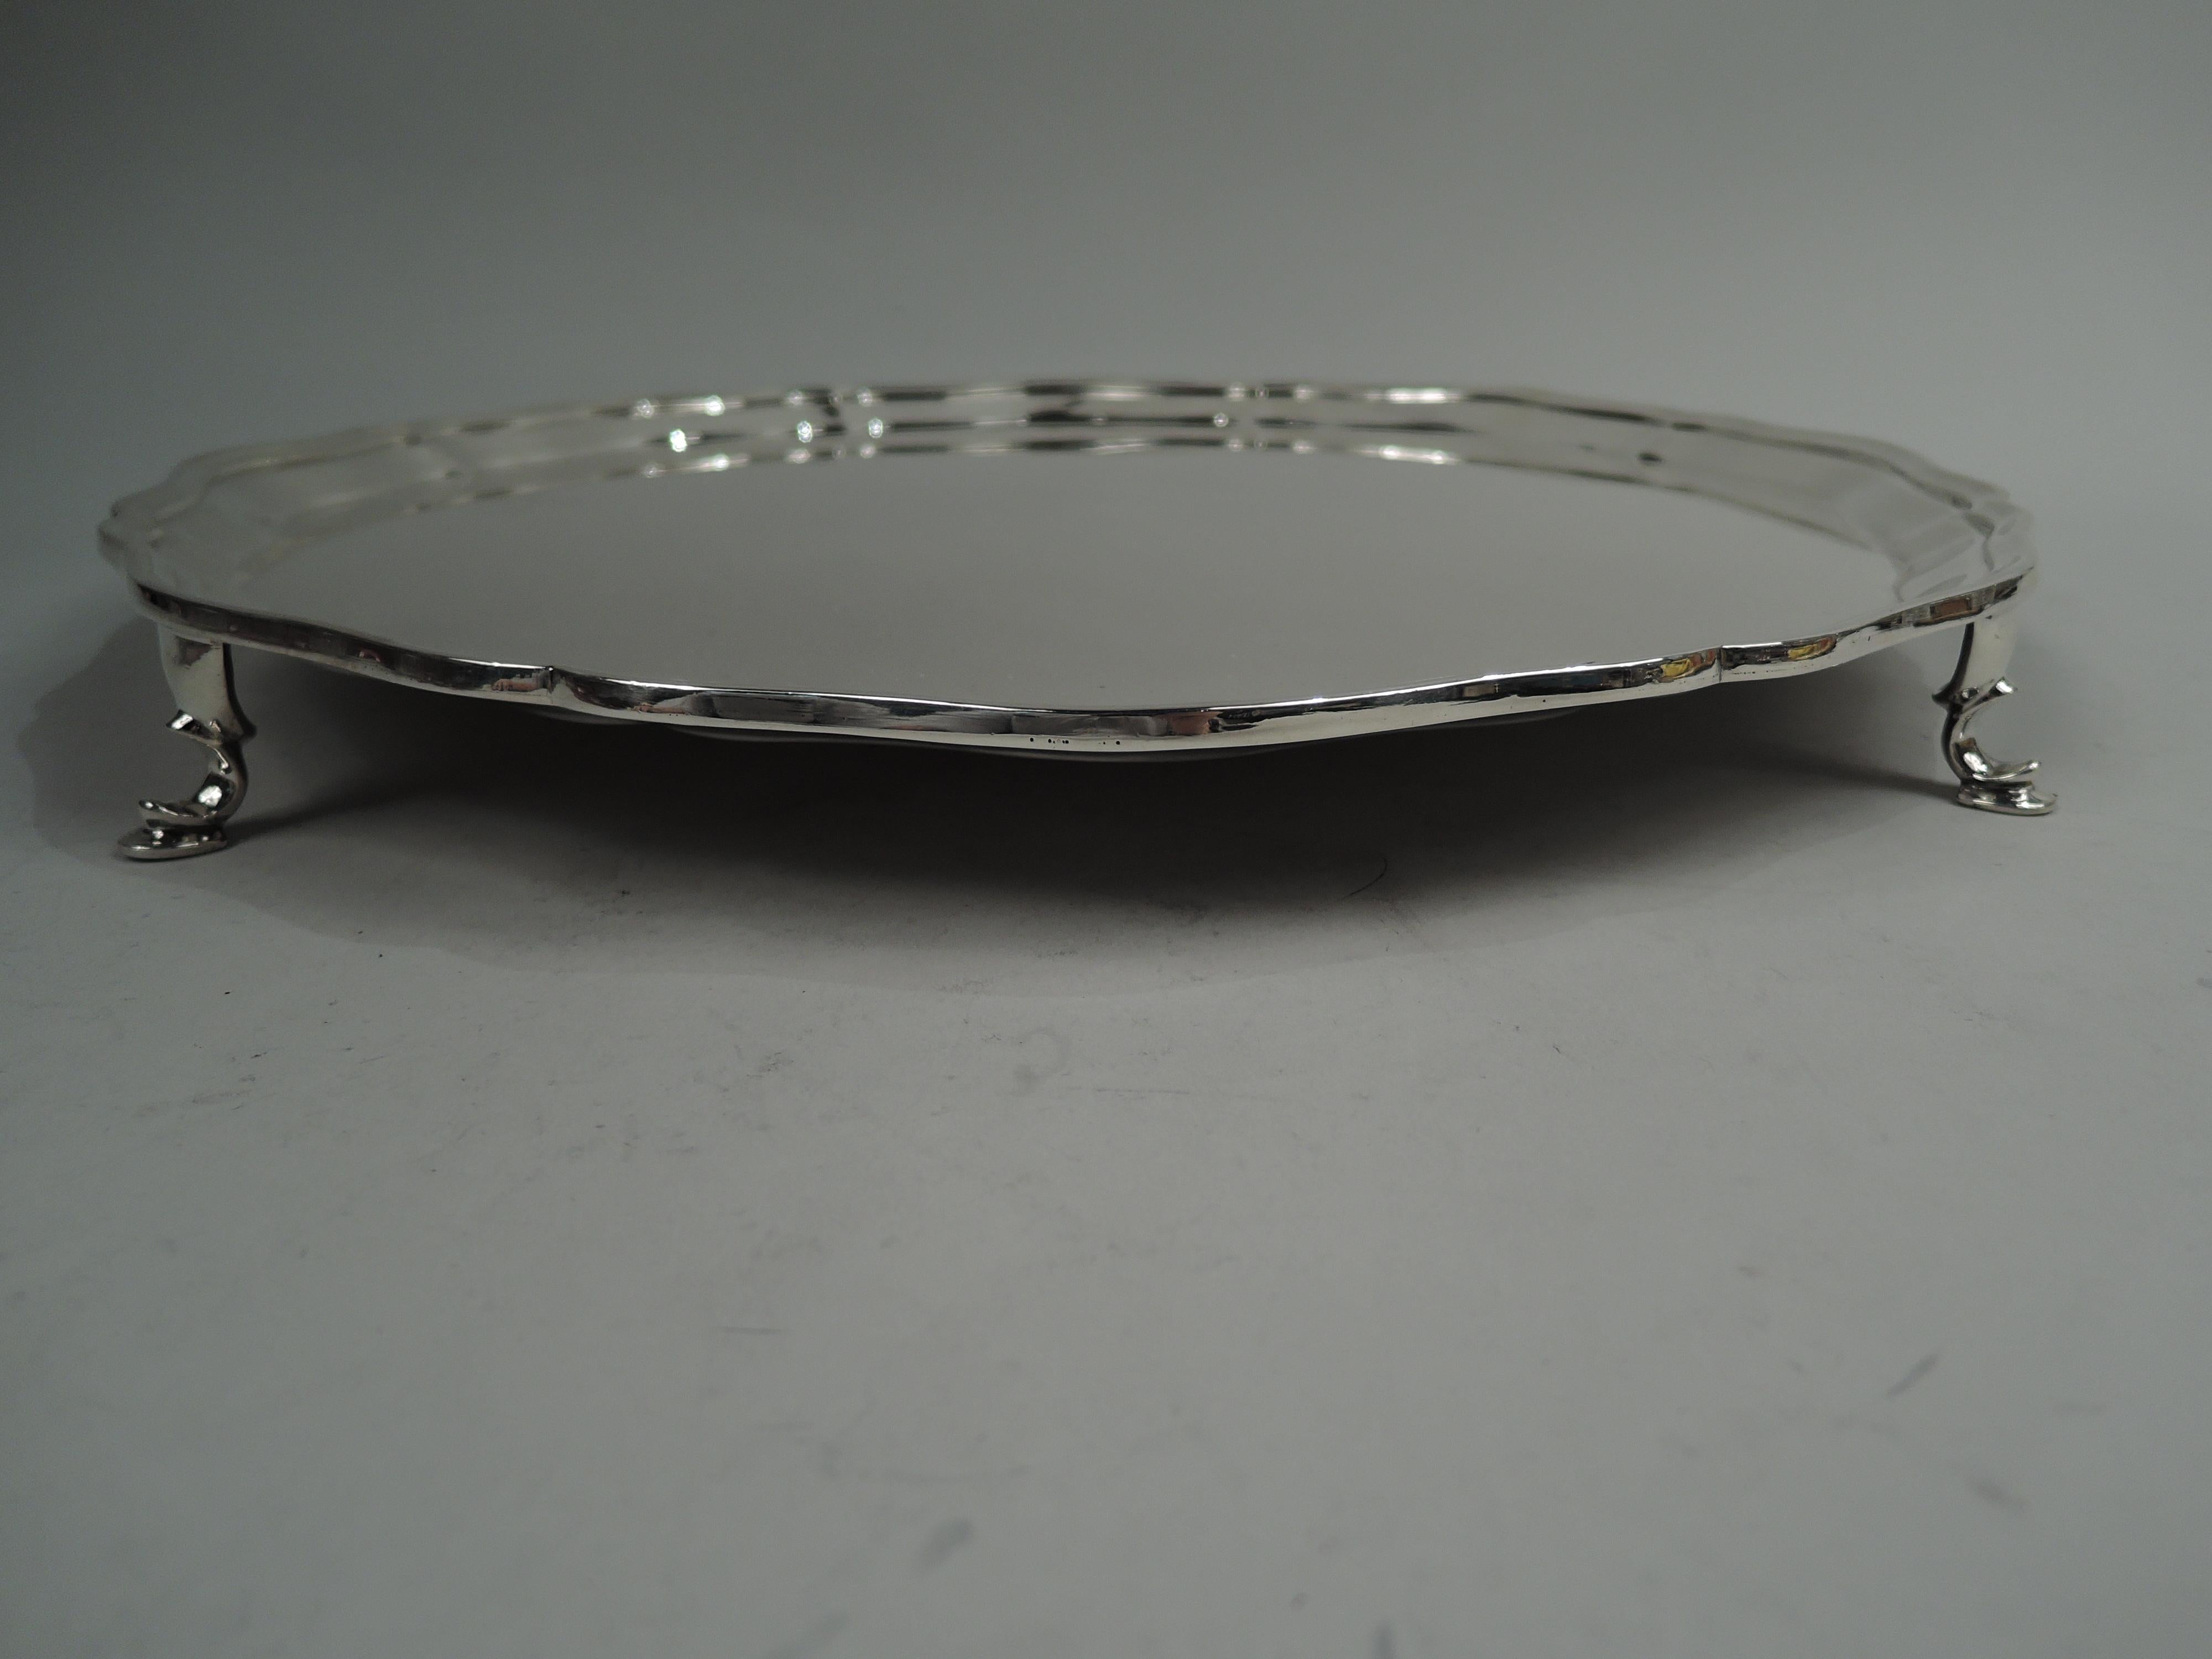 English Georgian sterling silver salver, 1926. Retailed by Tiffany & Co. in England. Round with molded serpentine rim. Four scroll-mounted hoof supports. Fully marked including maker’s stamp (Thomas Bradbury & Sons Ltd) and London assay stamp as